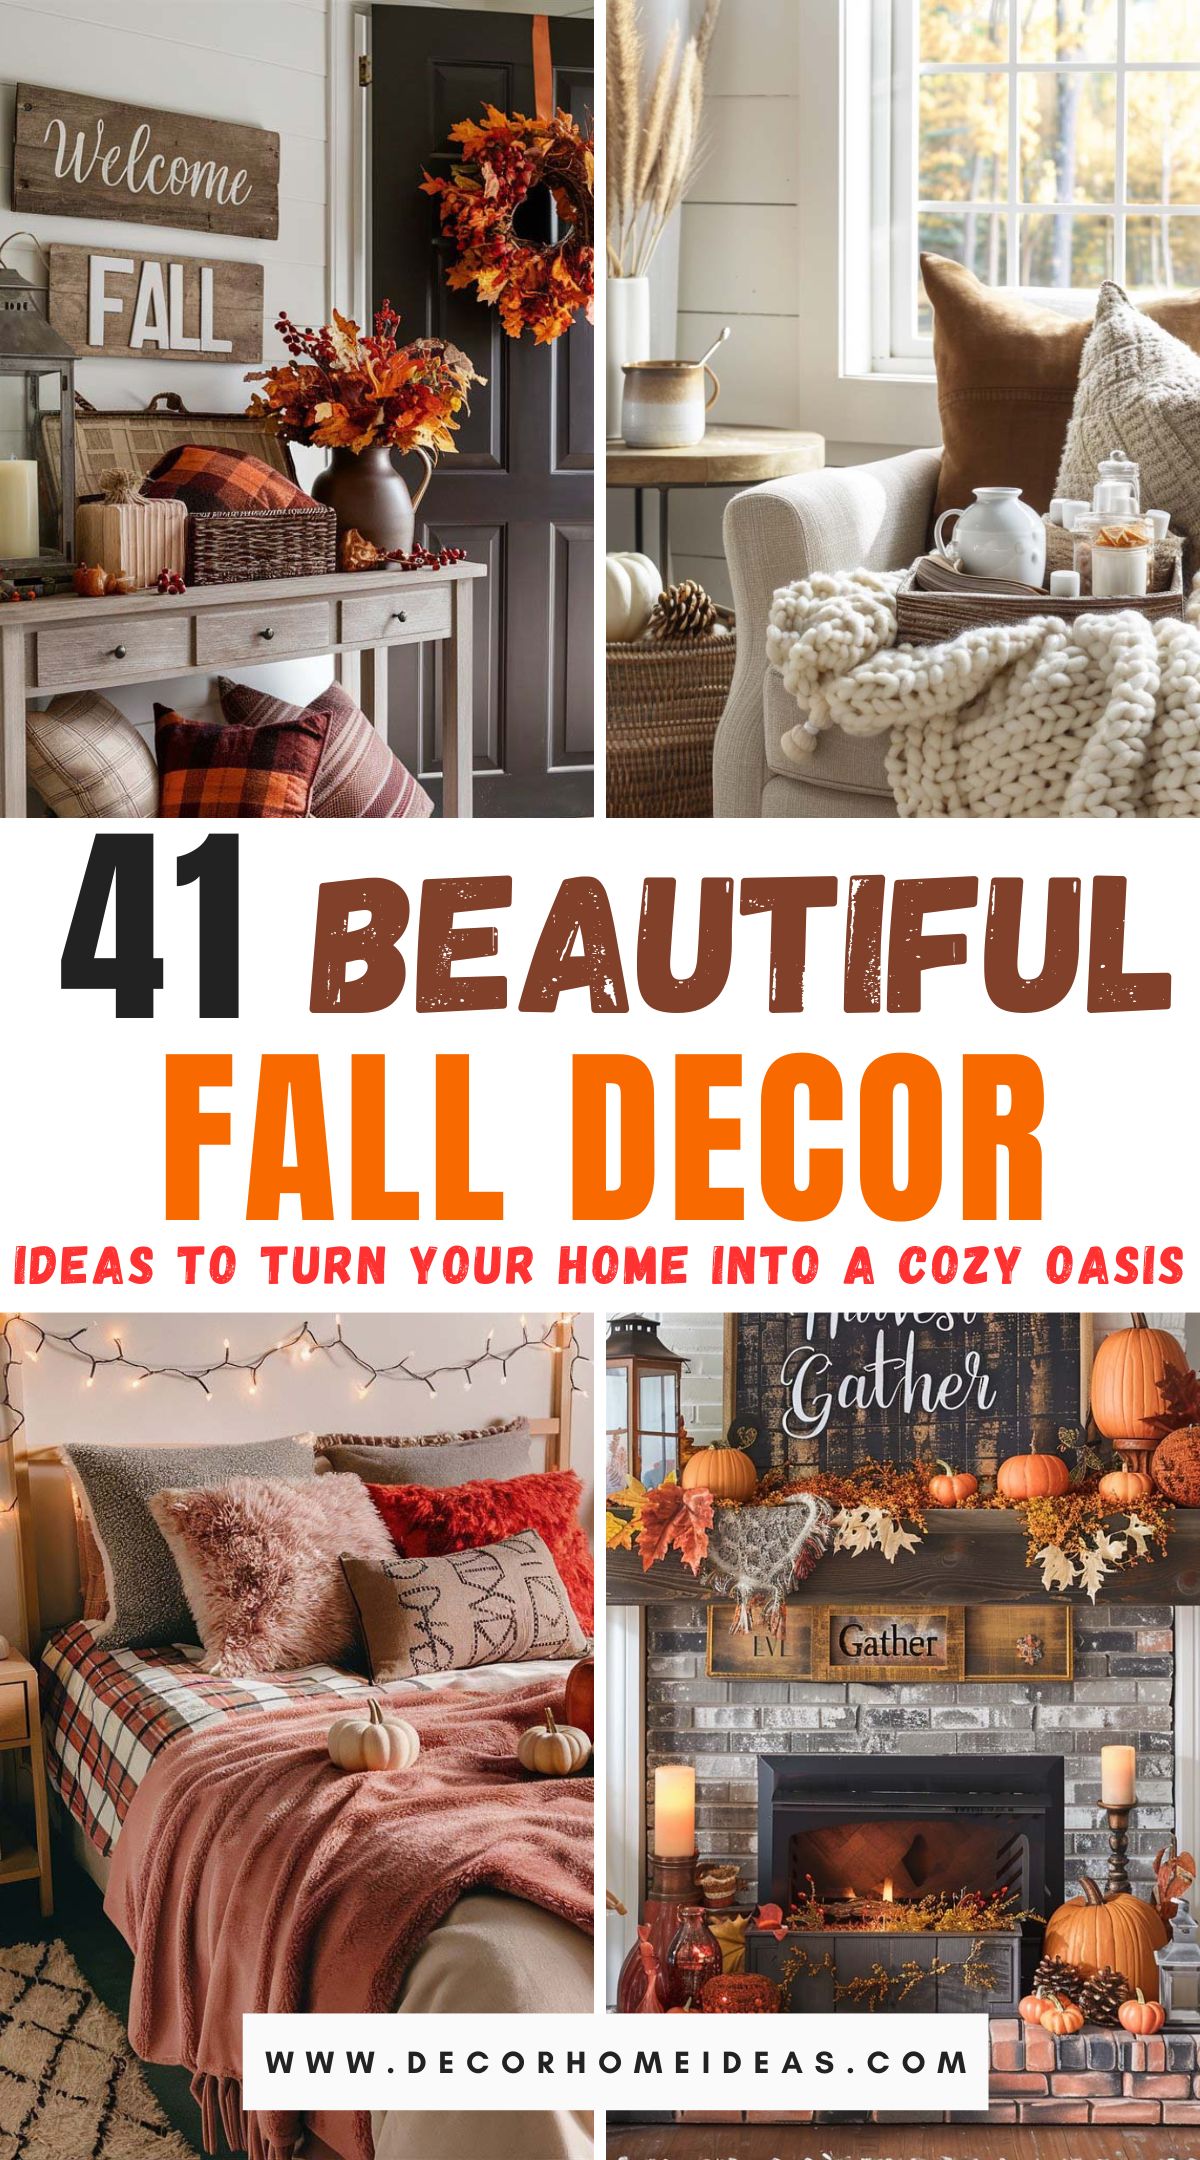 Embrace the season with 41 stunning fall decor ideas that will turn your home into a cozy haven. From warm color palettes to inviting textures, these tips will help you create a space that's perfect for autumn. Discover unique ways to incorporate seasonal elements and make your home warm and welcoming.